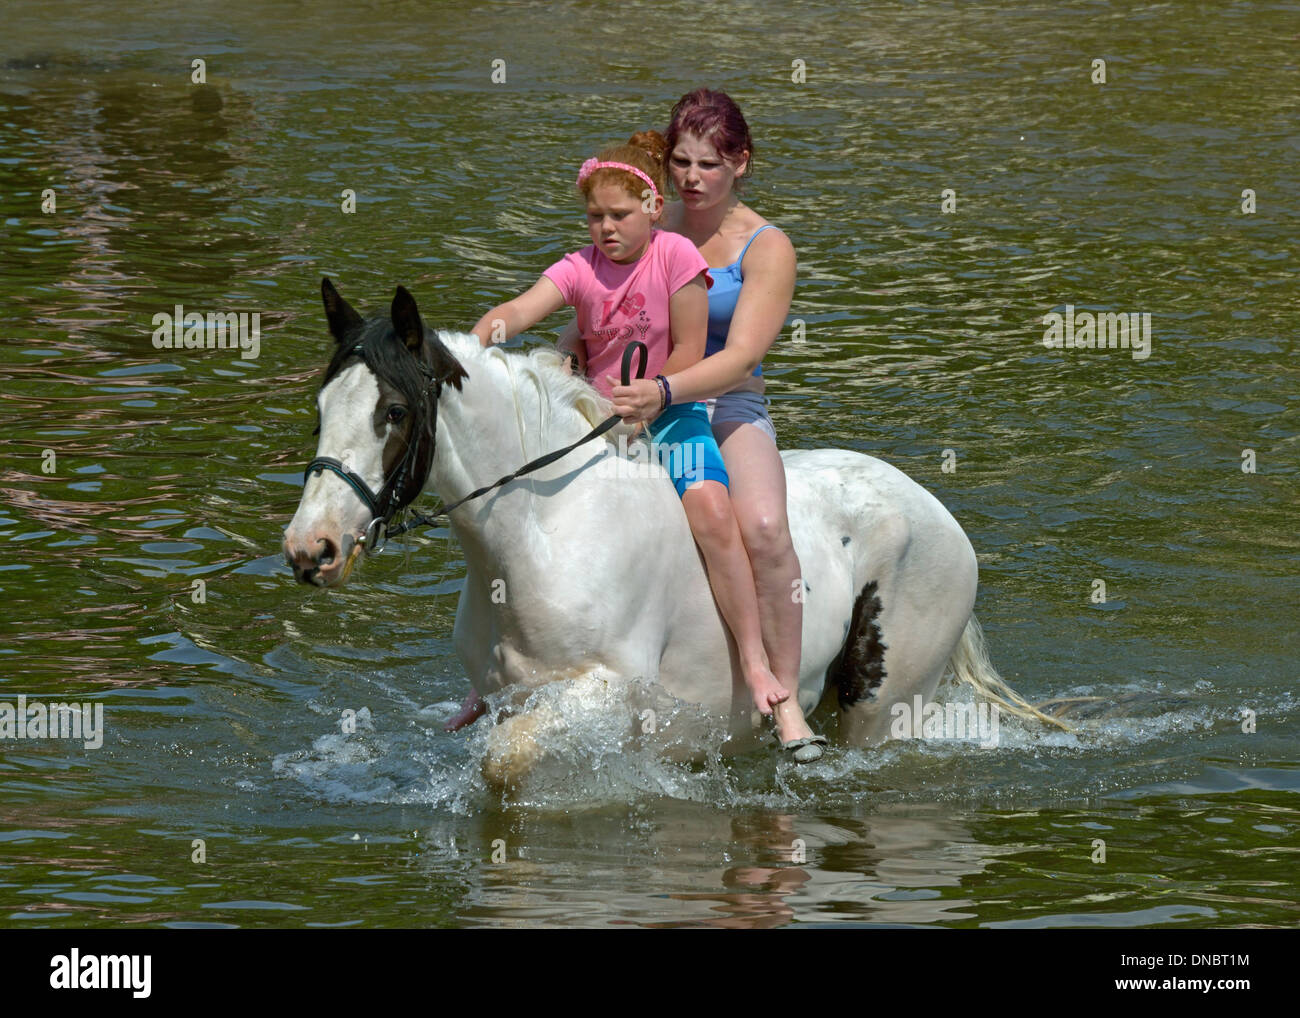 Gypsy traveller girls riding horse in River Eden. Appleby Horse Fair, June 2013. Appleby-in-Westmorland, Cumbria, England. Stock Photo